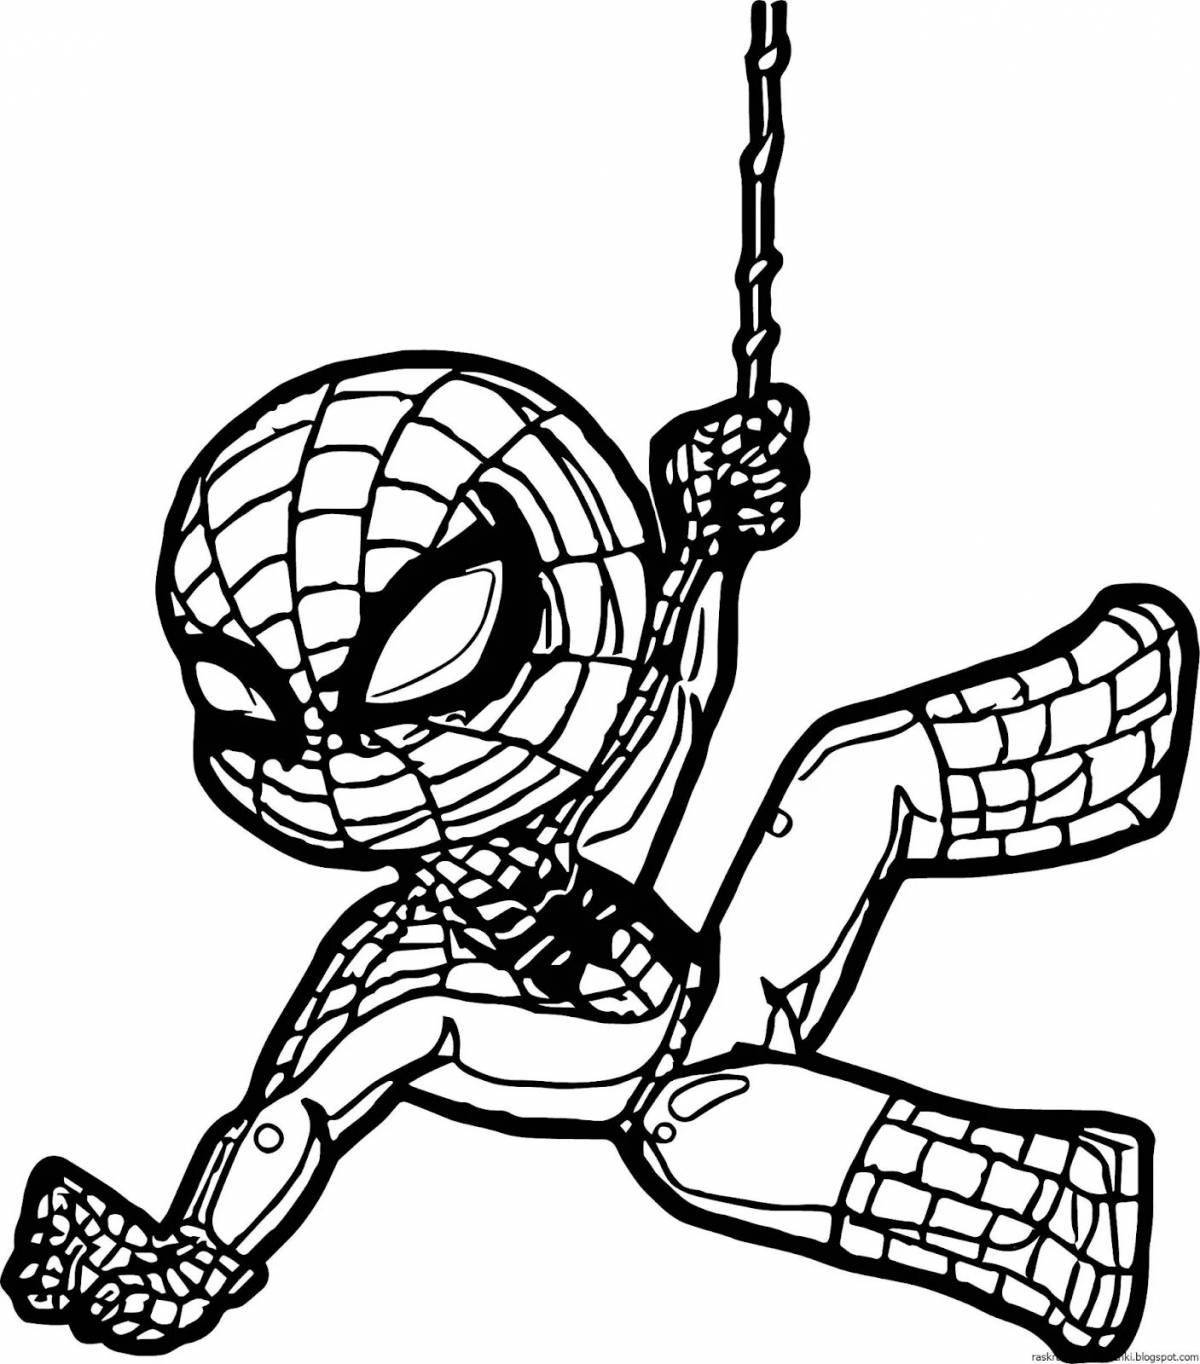 Spider-man shiny coloring photo